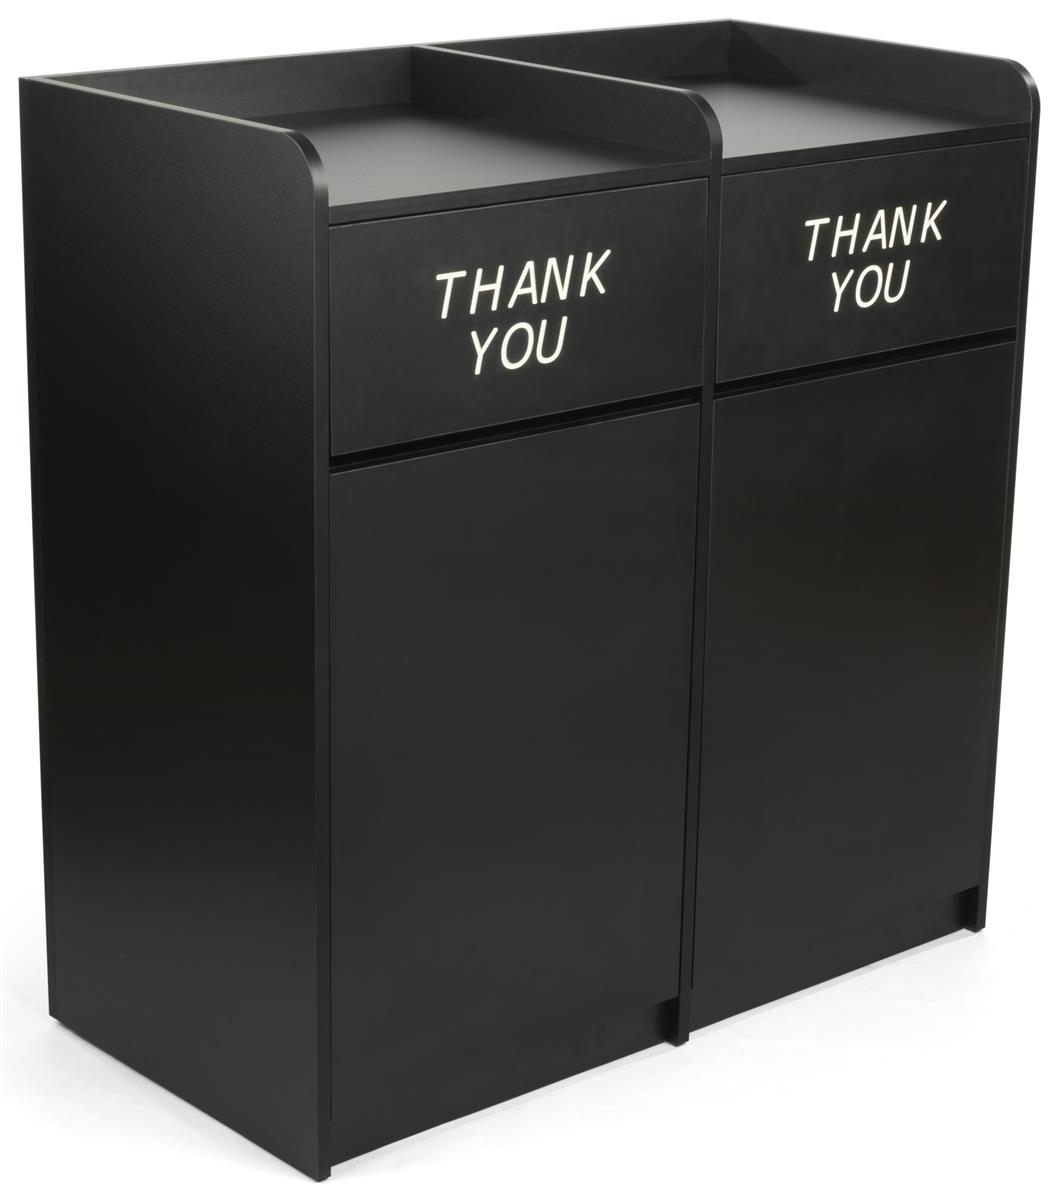 Side by side restaurant waste receptacles with "Thank You" engraved on each door 